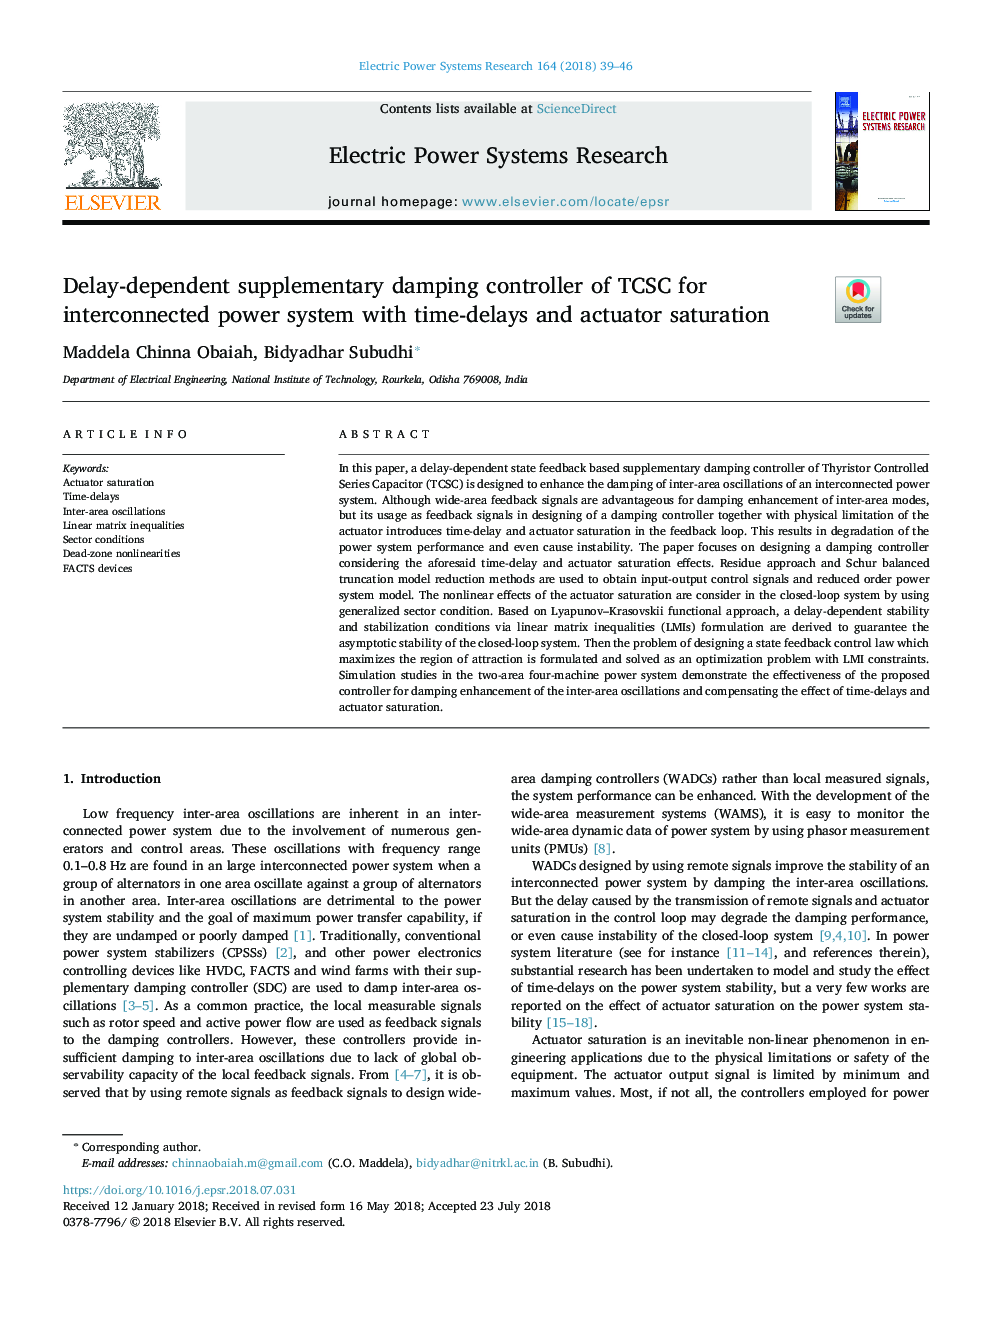 Delay-dependent supplementary damping controller of TCSC for interconnected power system with time-delays and actuator saturation